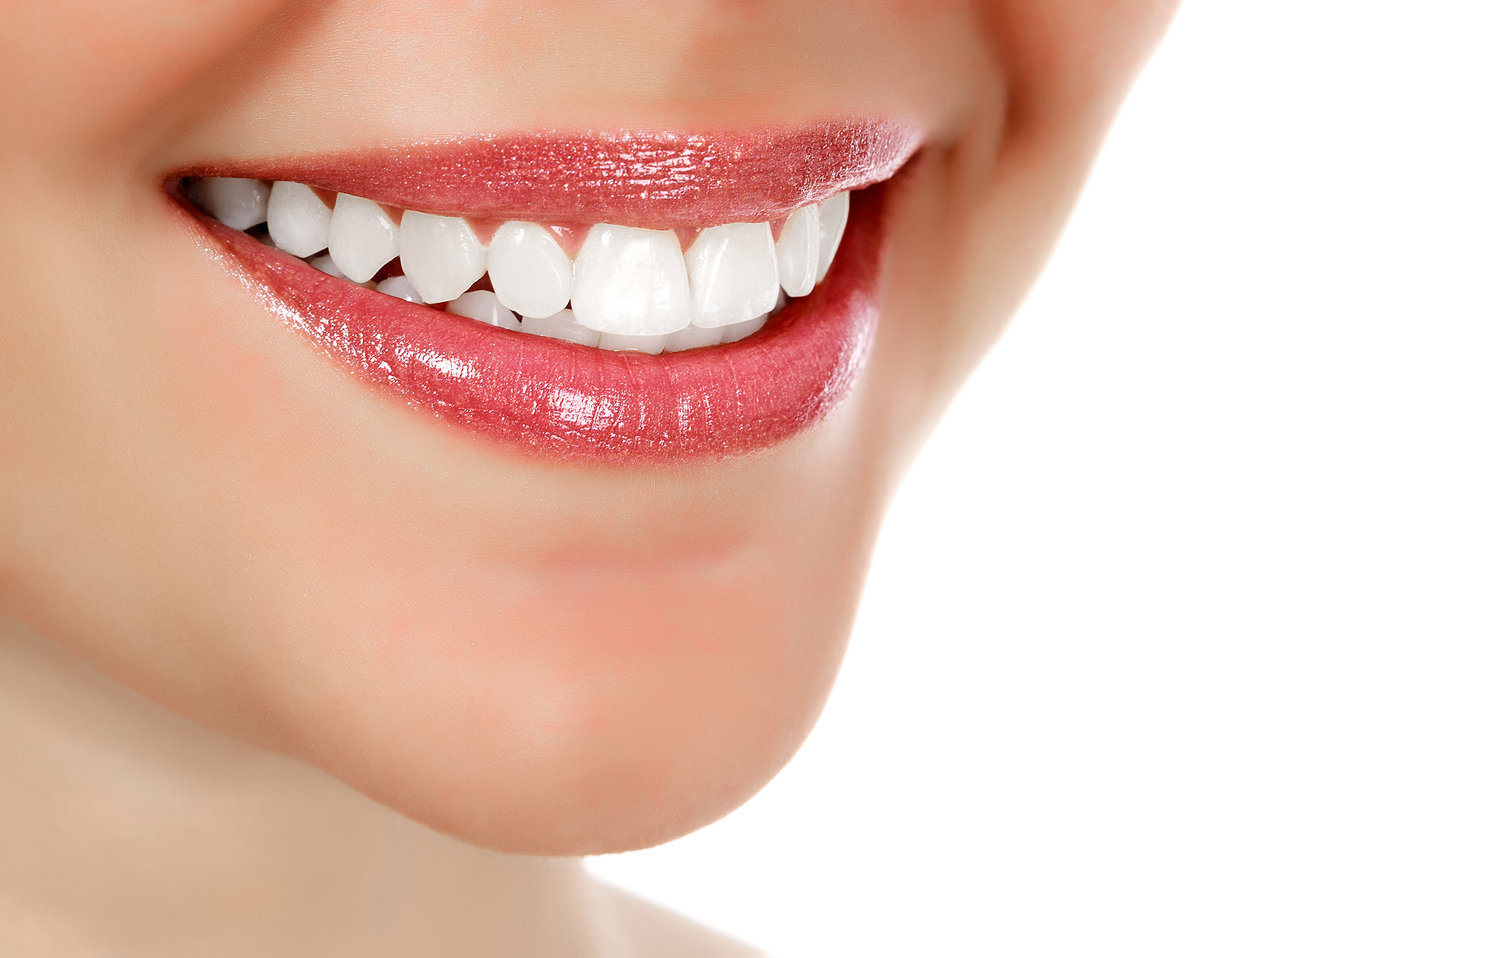 How to Whiten Your Teeth Without Damaging Them